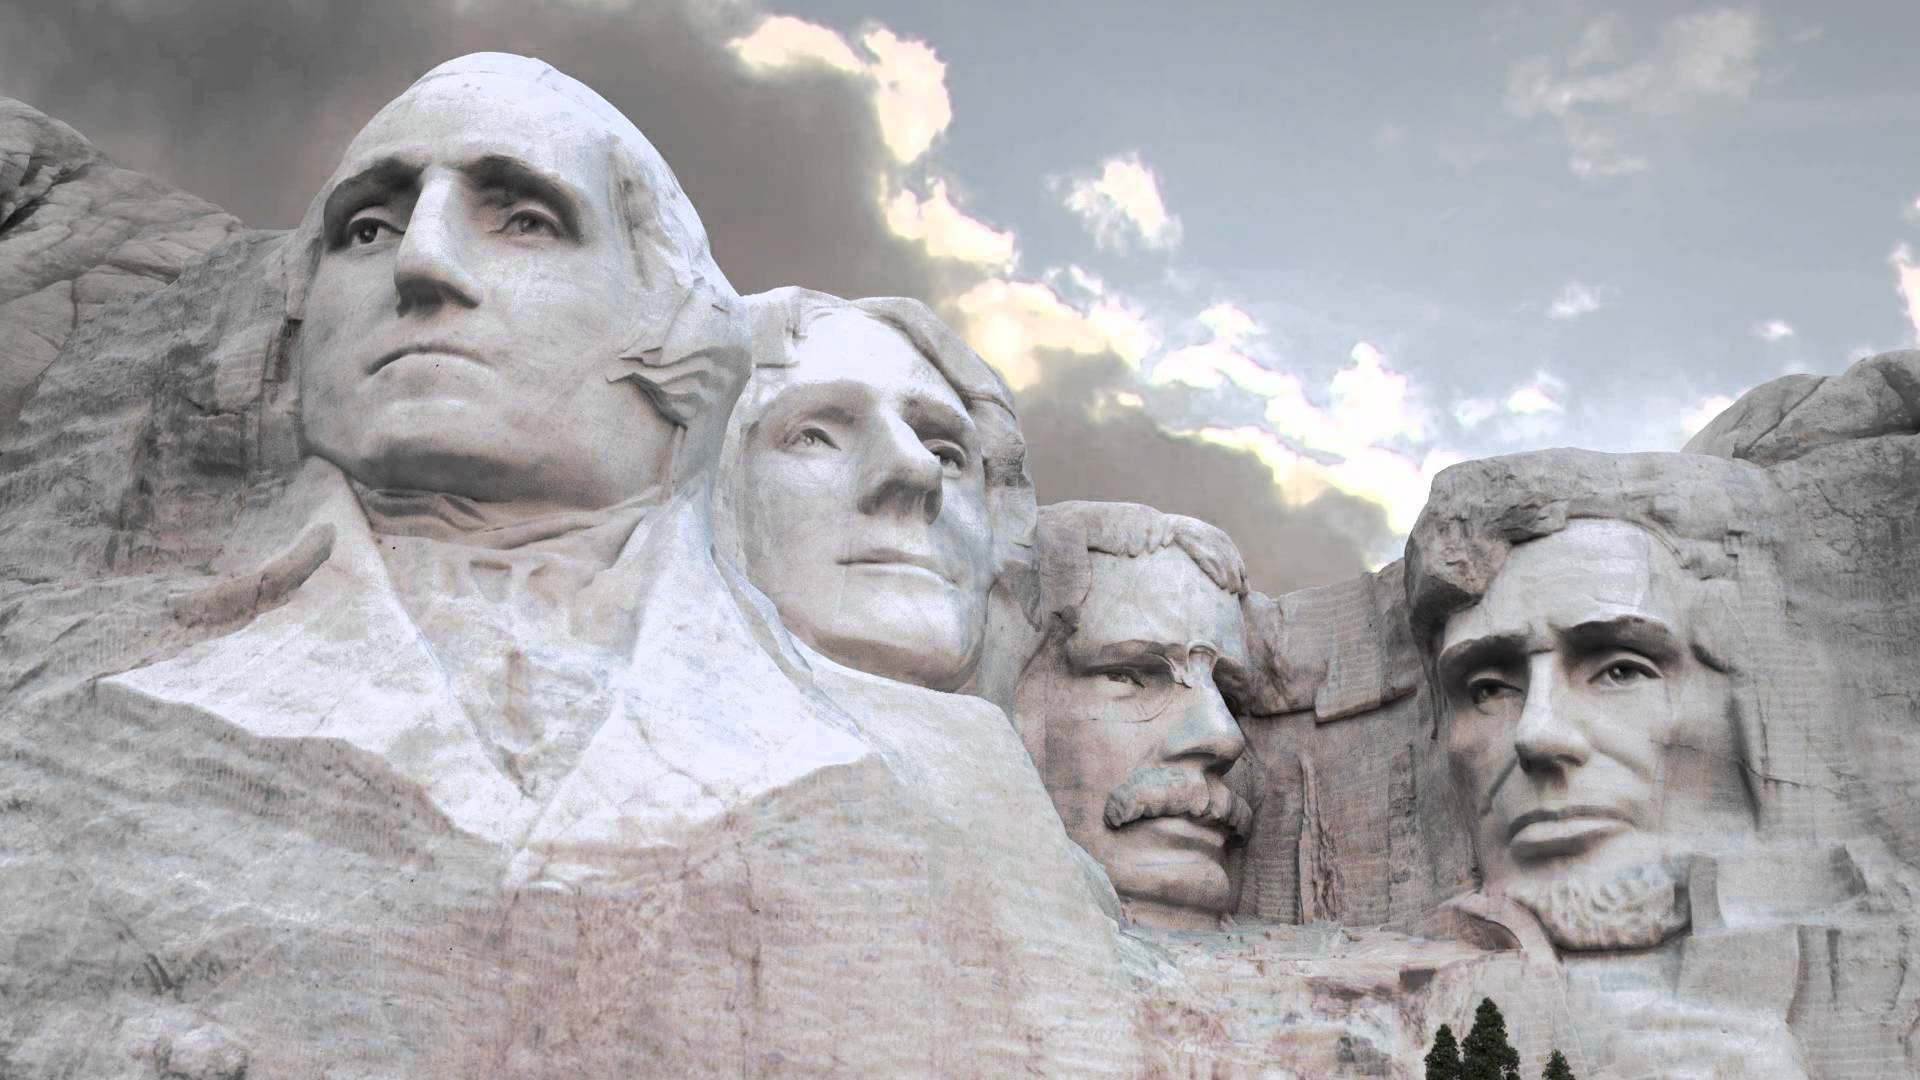 Majestic Mount Rushmore on a Gloomy Day Wallpaper